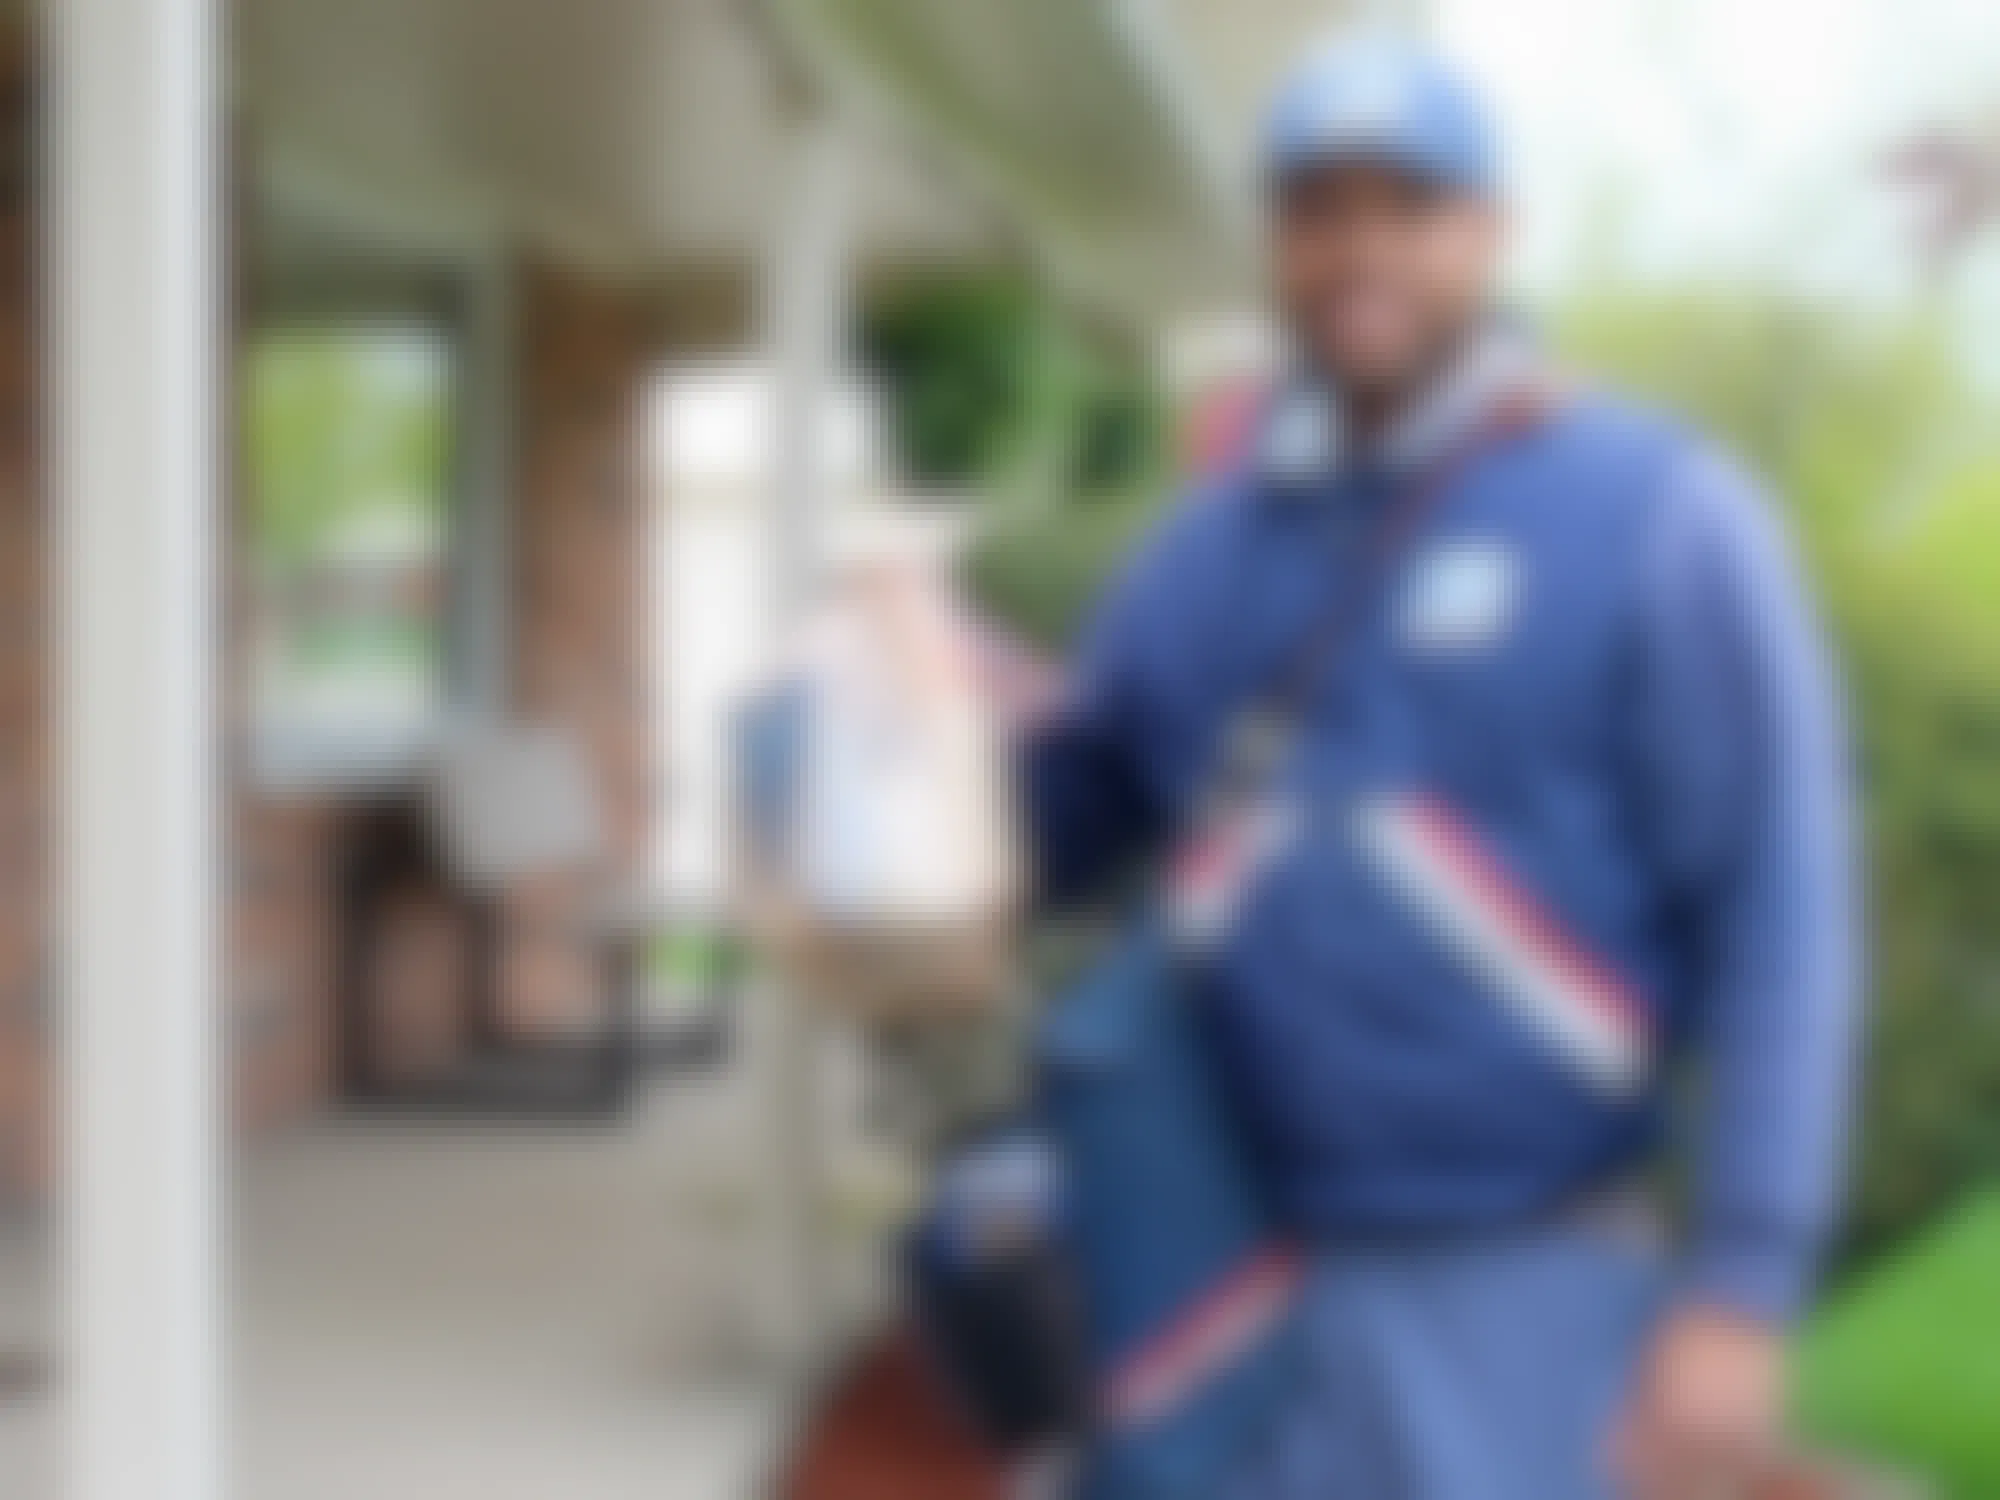 USPS employee during the Stamp Out Hunger day collecting food donations